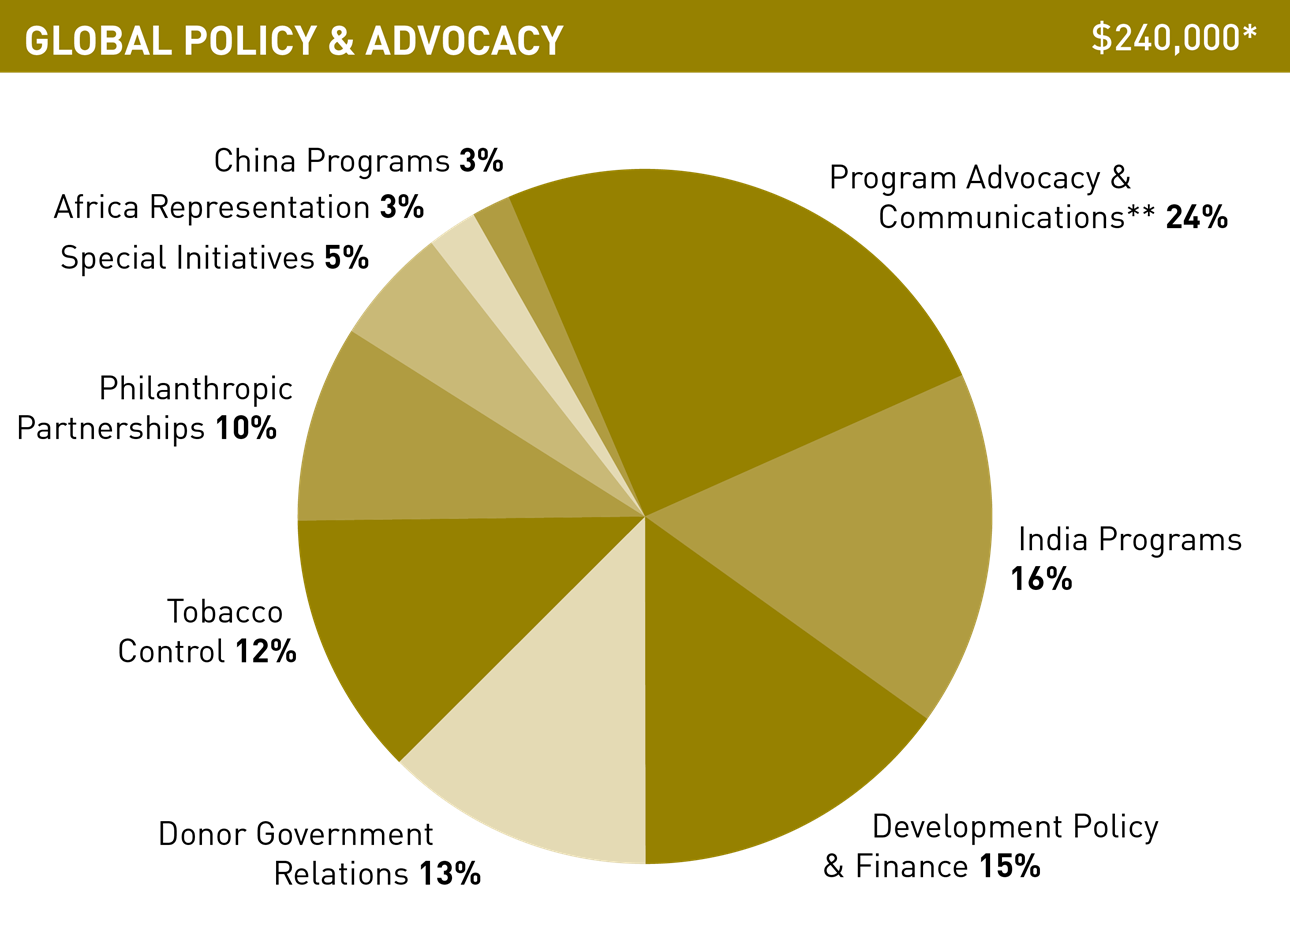 Gates Foundation Annual Report 2015 Global Policy and Advocacy